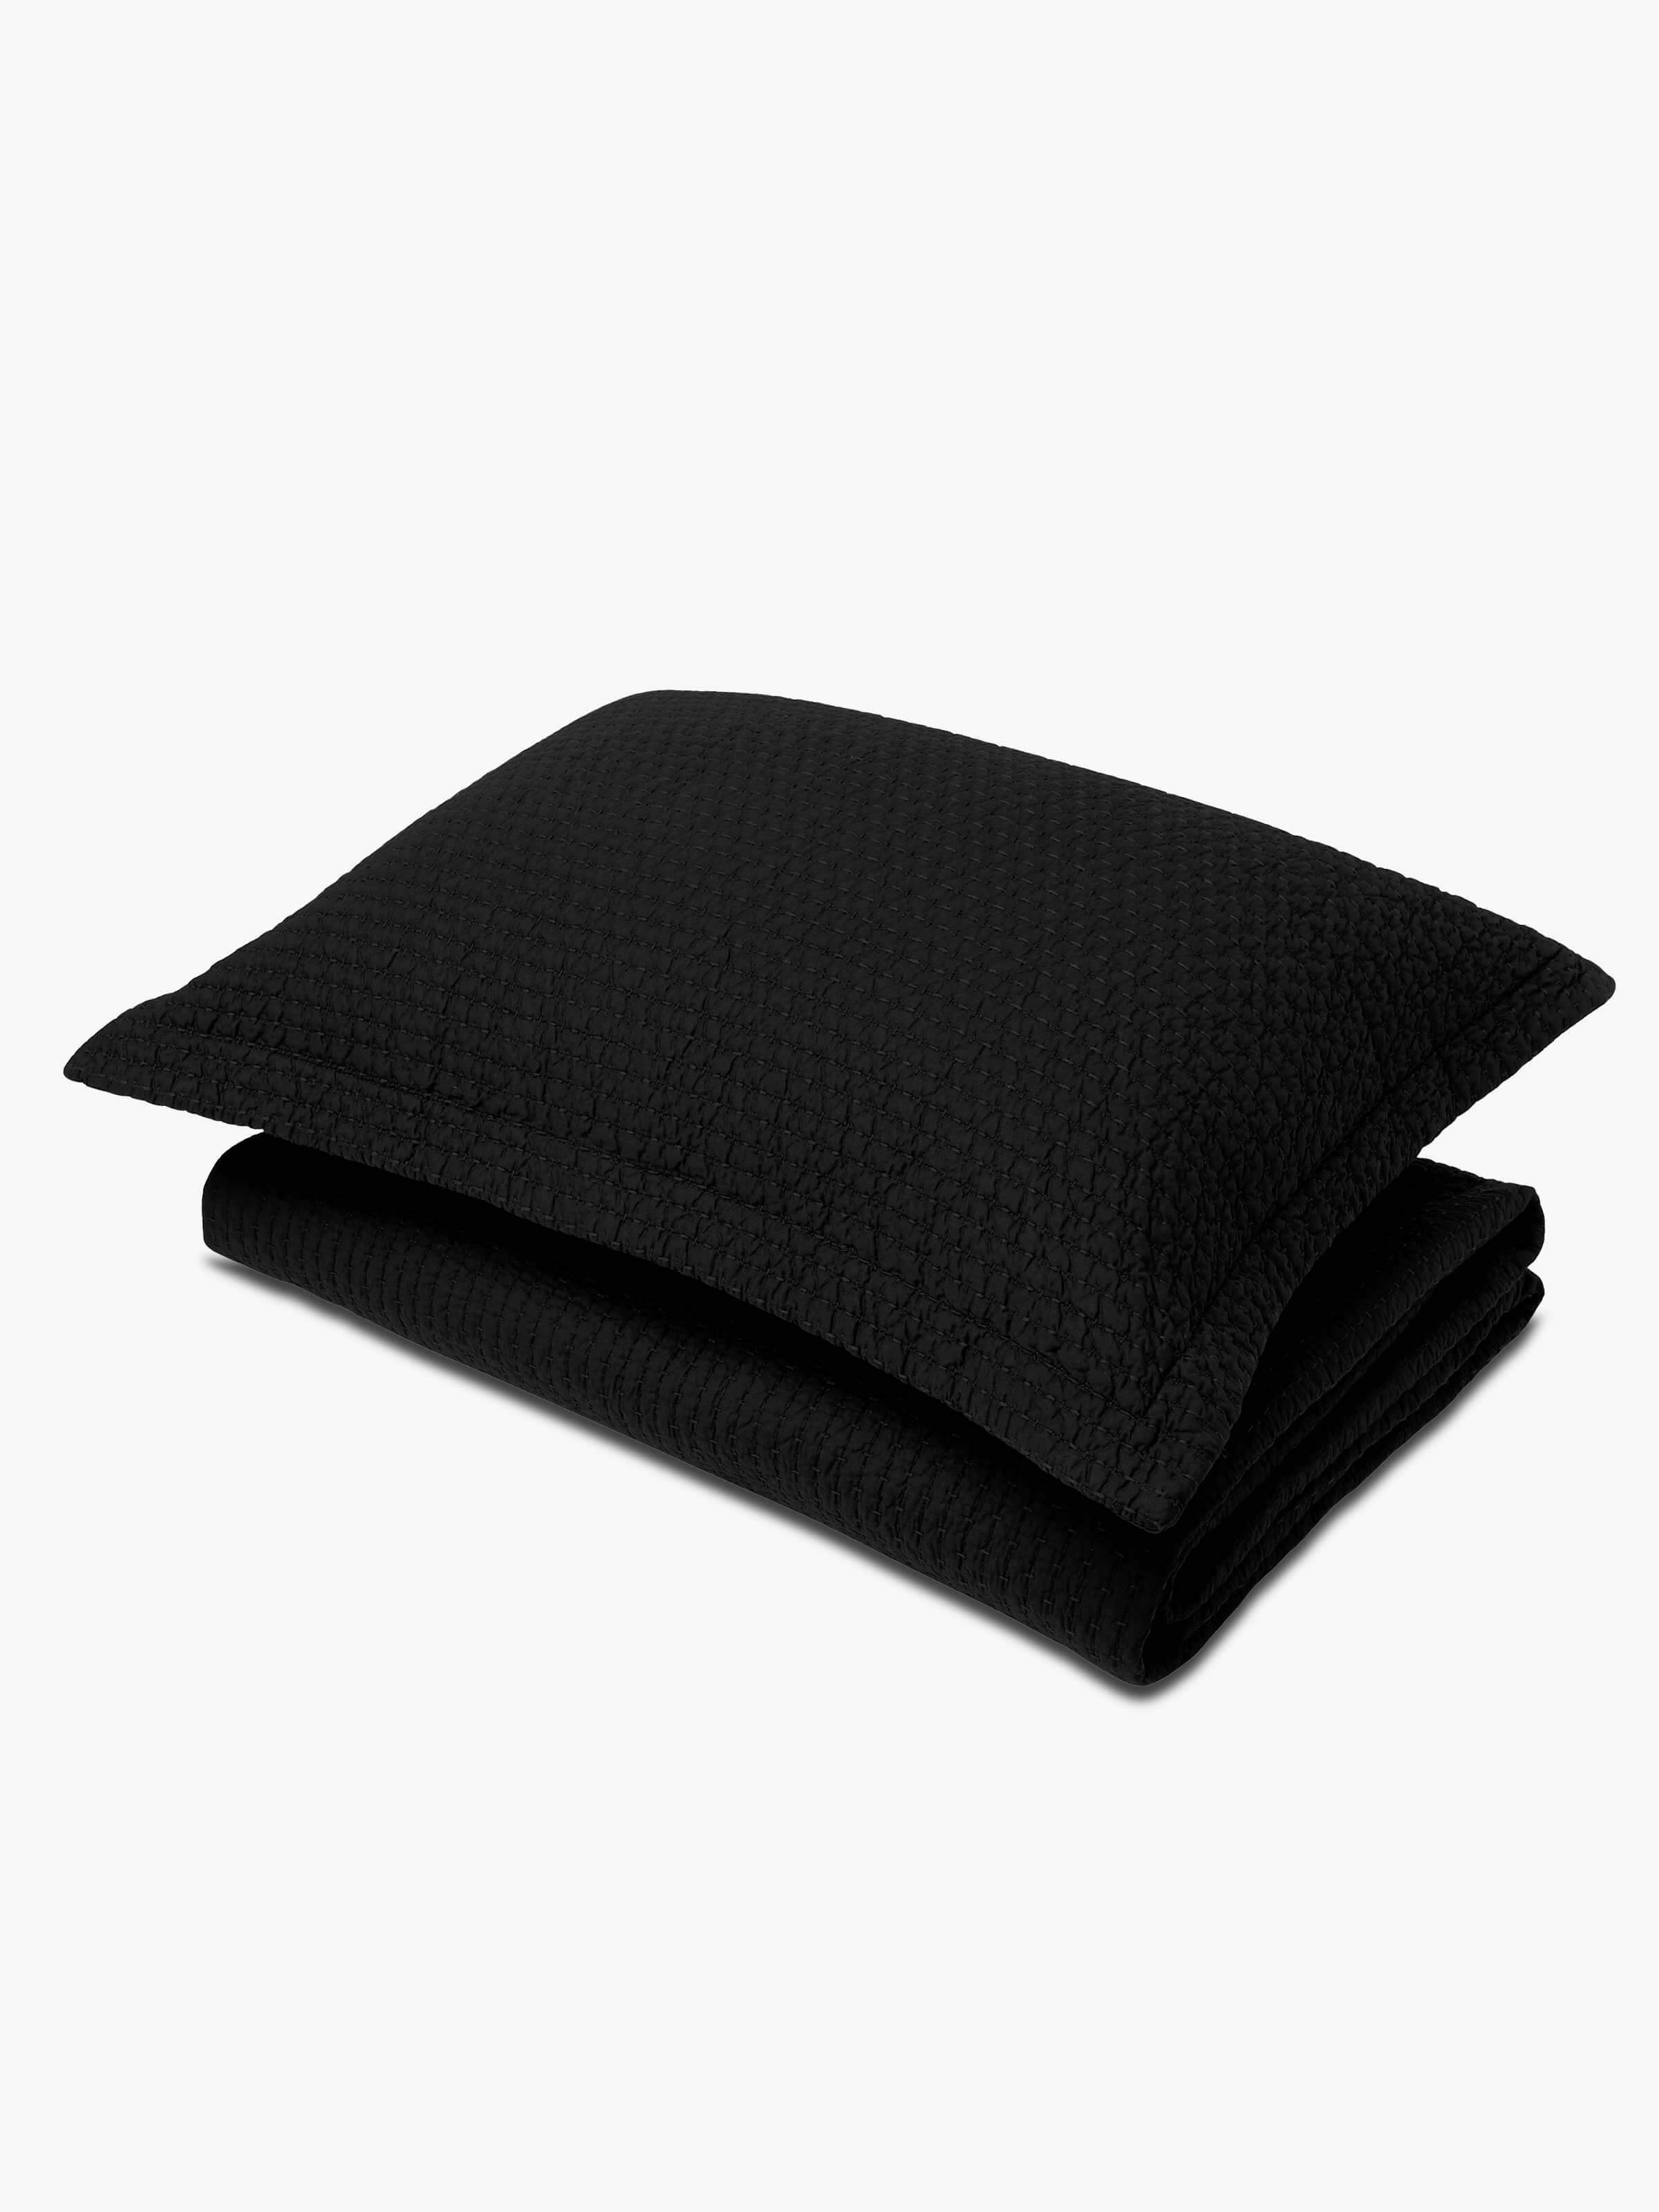 Aspen Quilted Pillowcase - Black Quilted Pillowcase 2020 